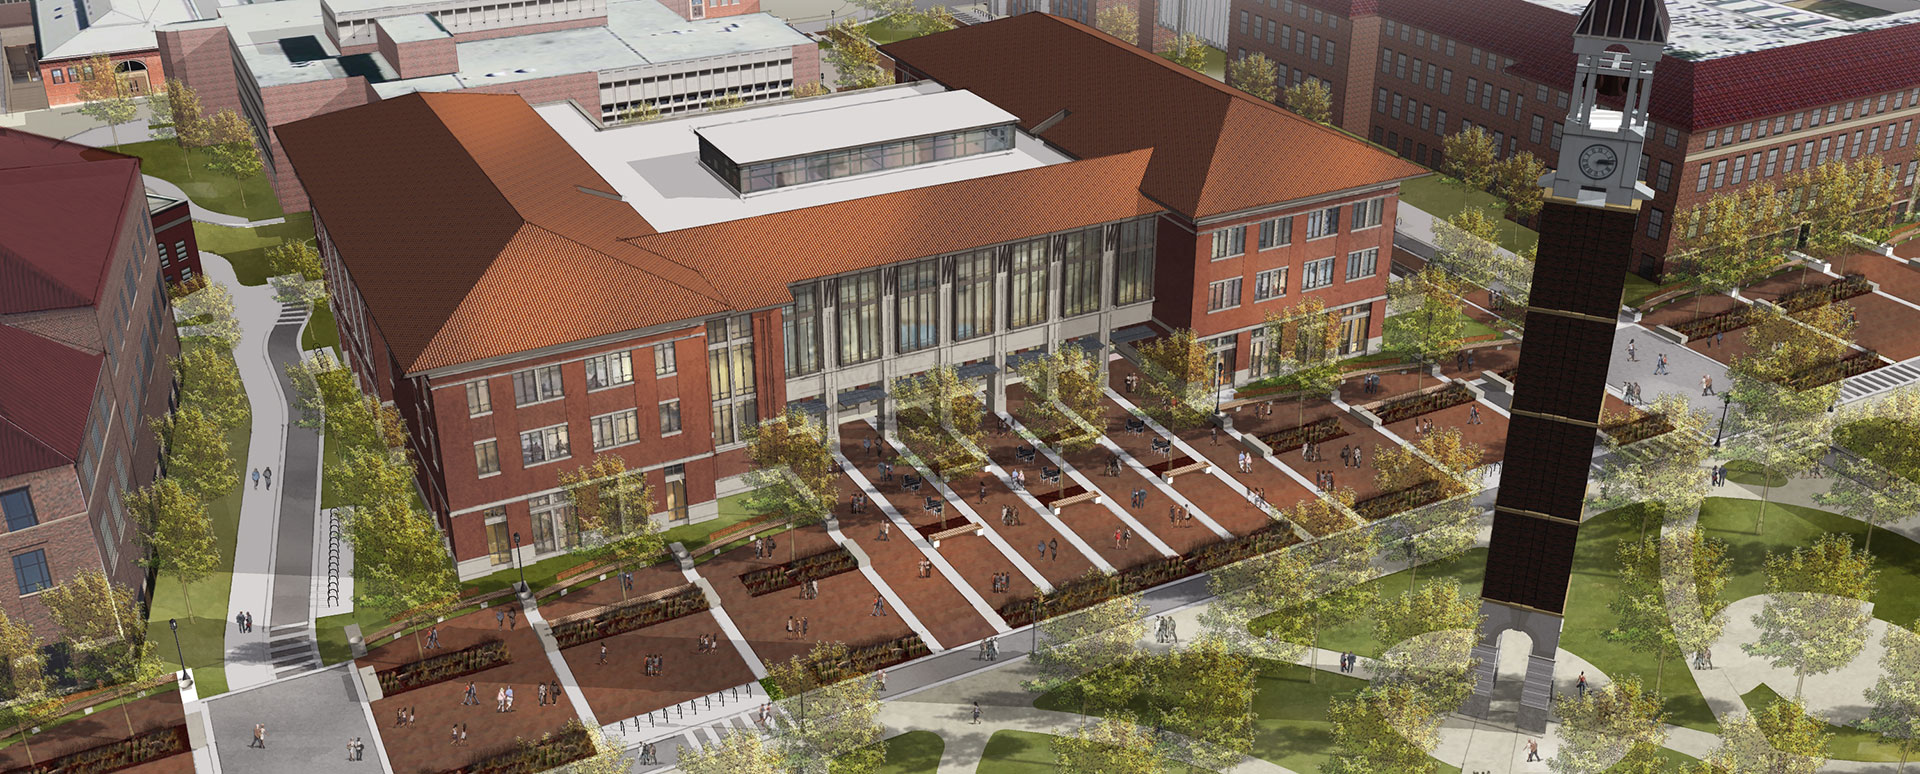 Rendering of the WALC building shown from above